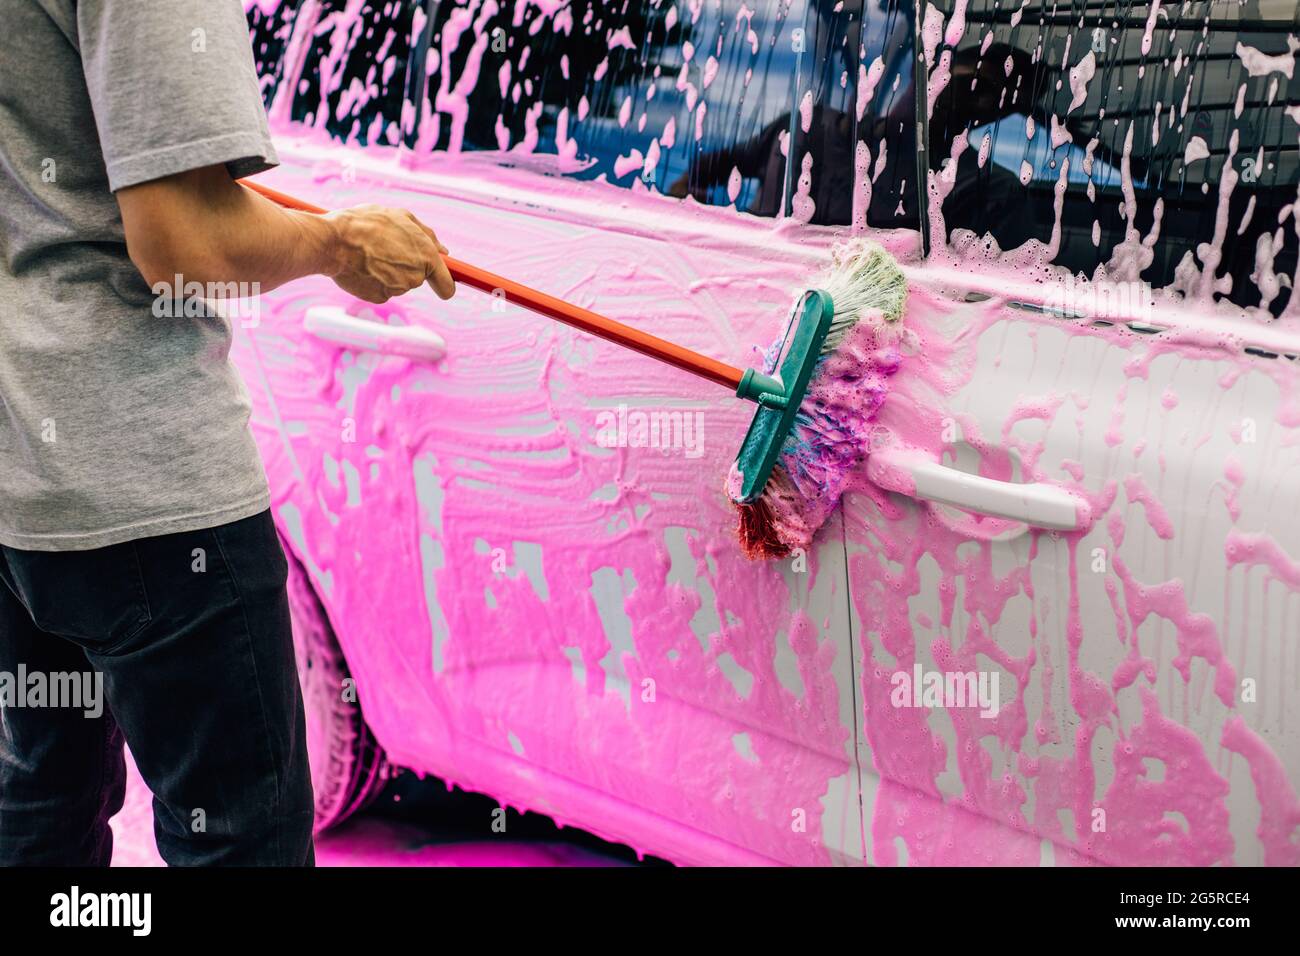 https://c8.alamy.com/comp/2G5RCE4/worker-washing-a-white-car-with-a-brush-at-a-car-wash-a-man-cleans-up-dirt-on-a-car-with-pink-foam-and-a-brush-2G5RCE4.jpg